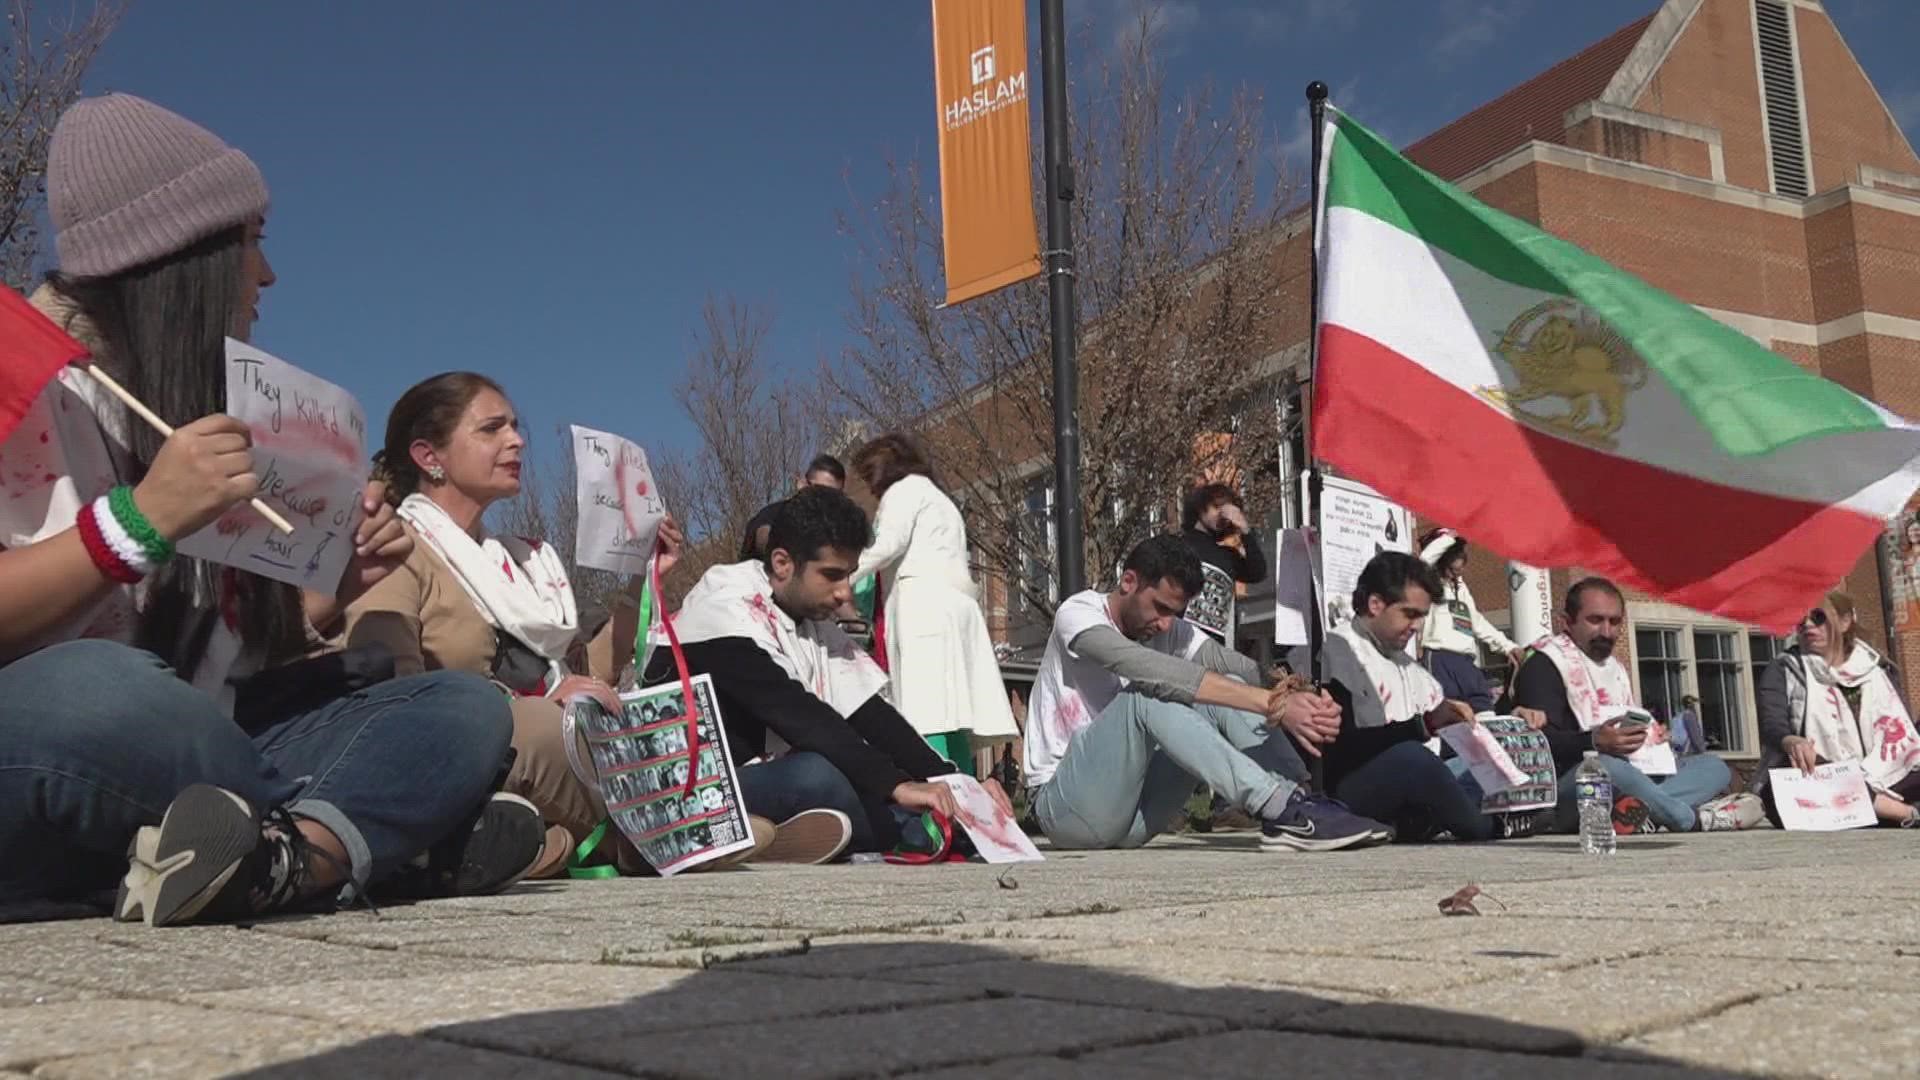 UT is one of more than 100 universities in the world where demonstrators are rallying to support human rights in Iran.